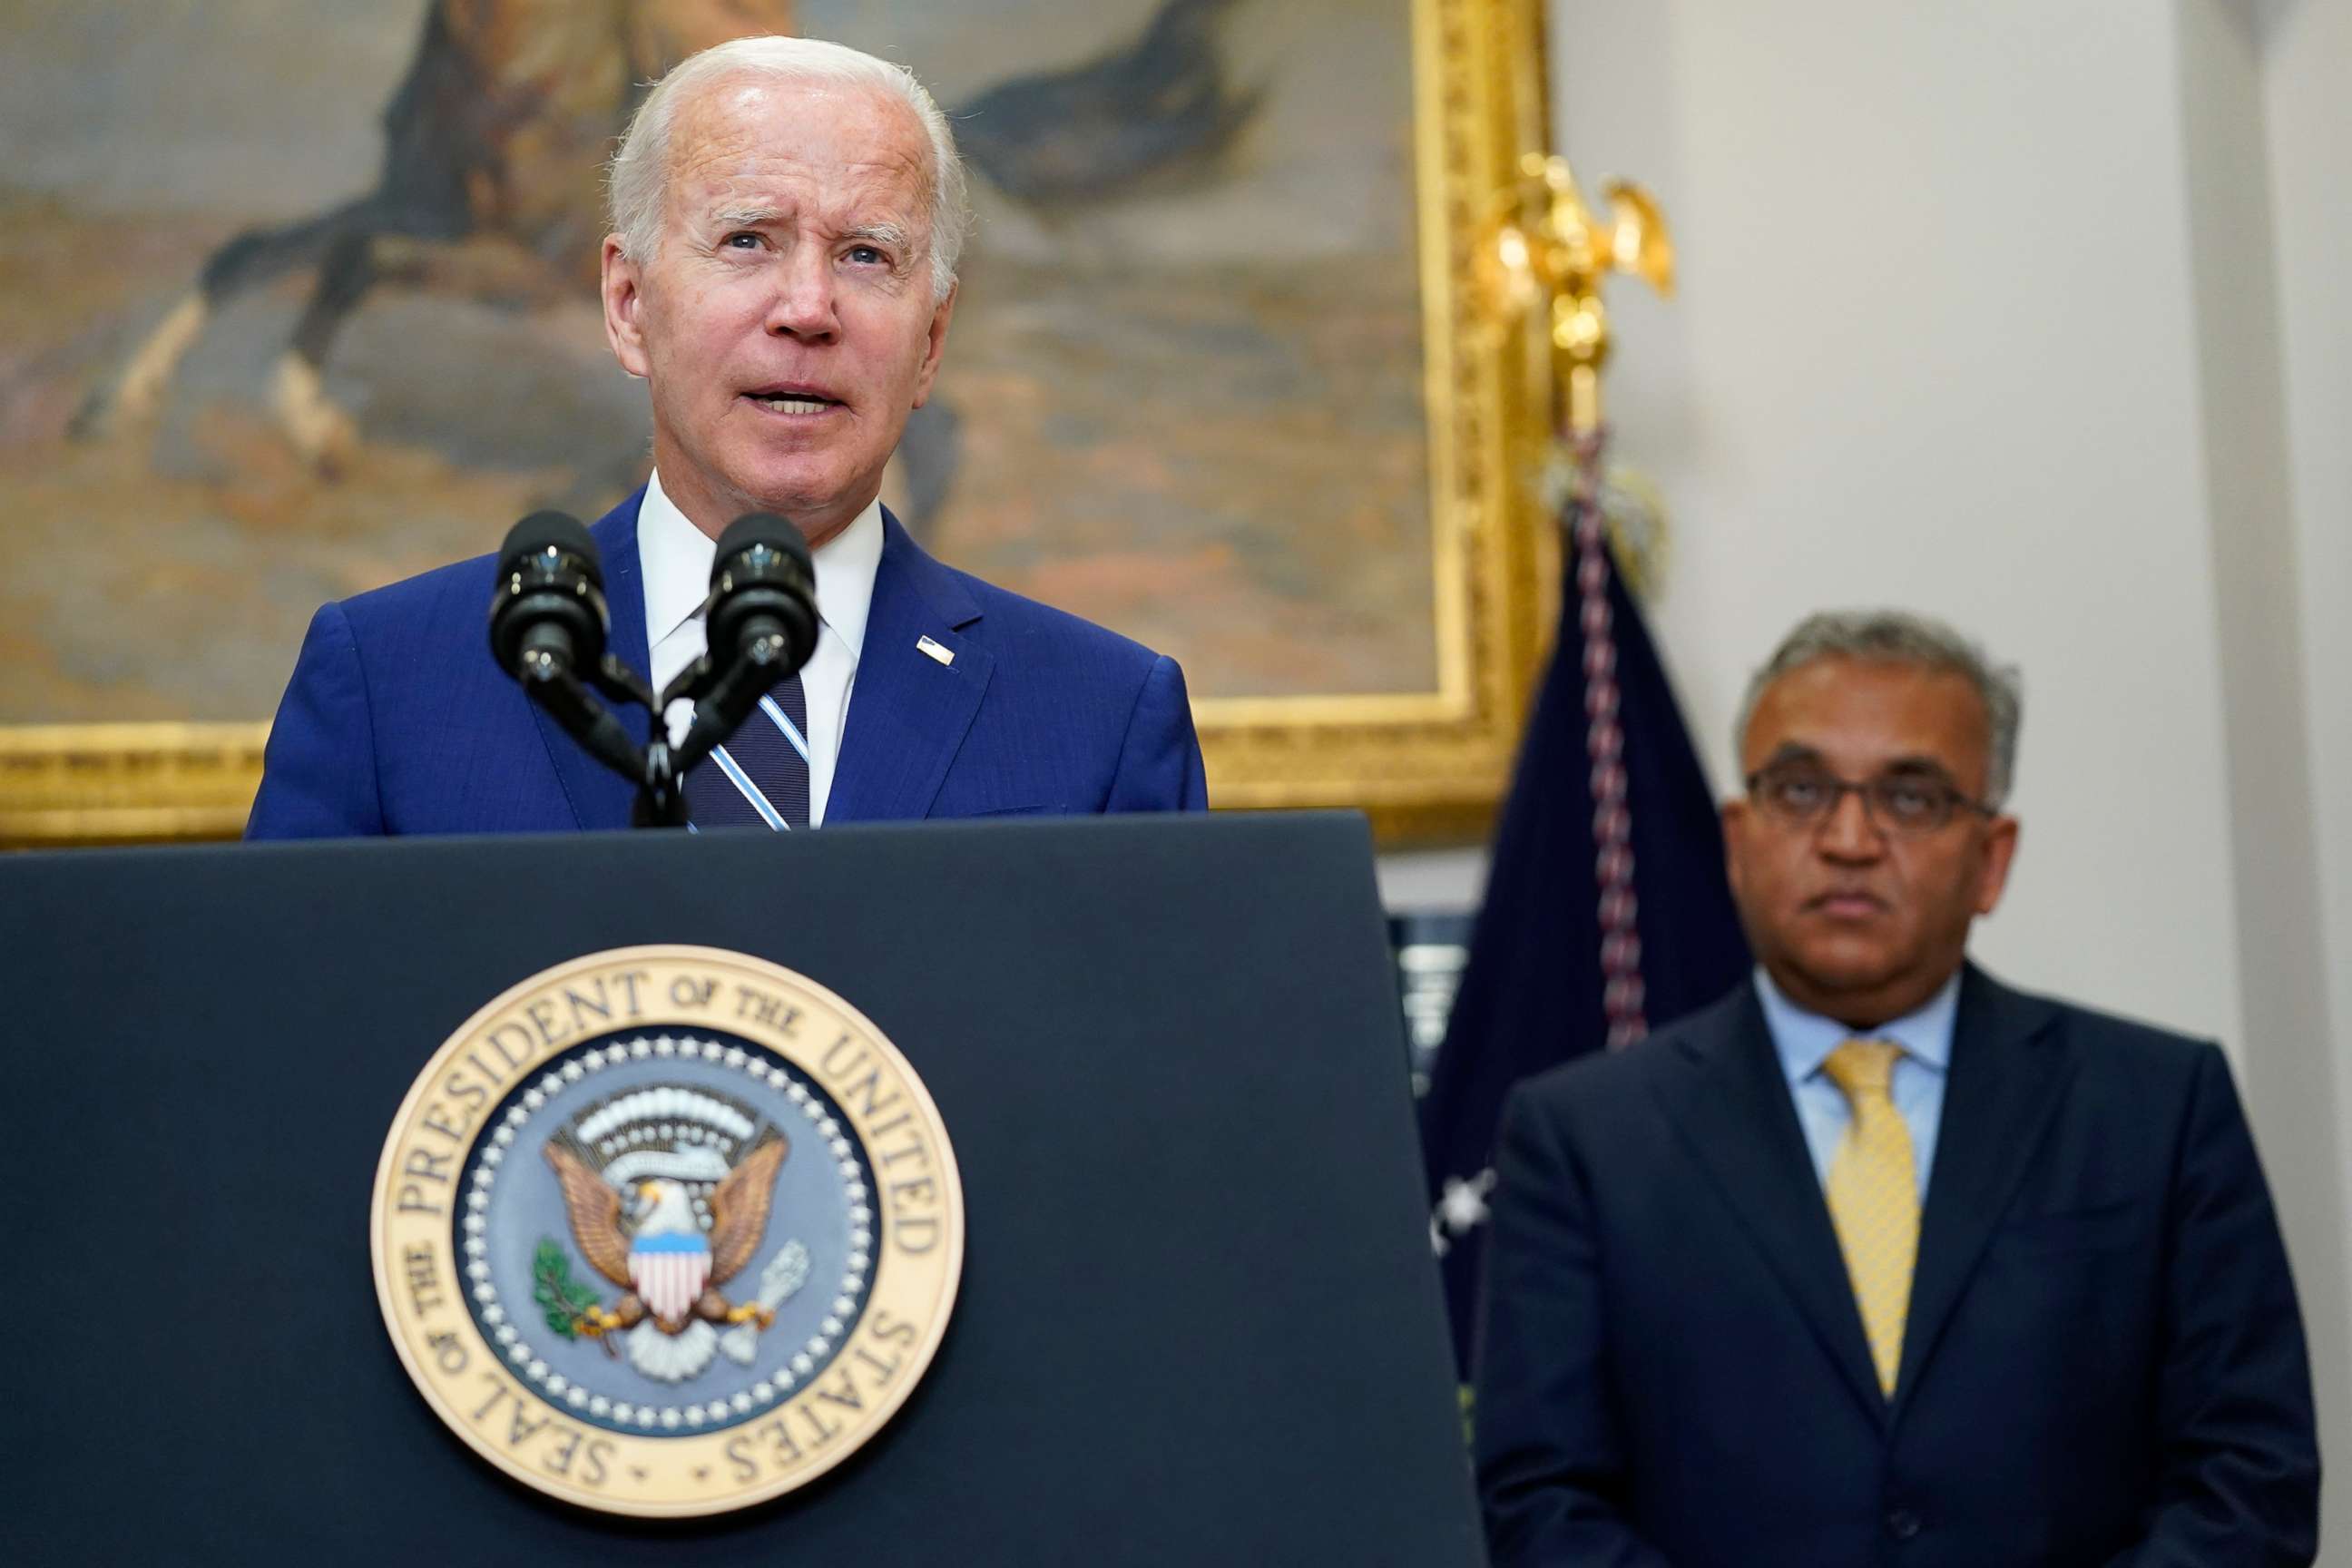 PHOTO: President Joe Biden, left, standing with White House COVID-19 Response Coordinator Ashish Jha, right, speaks about the newly approved COVID-19 vaccines for children under 5, June 21, 2022, at the White House.